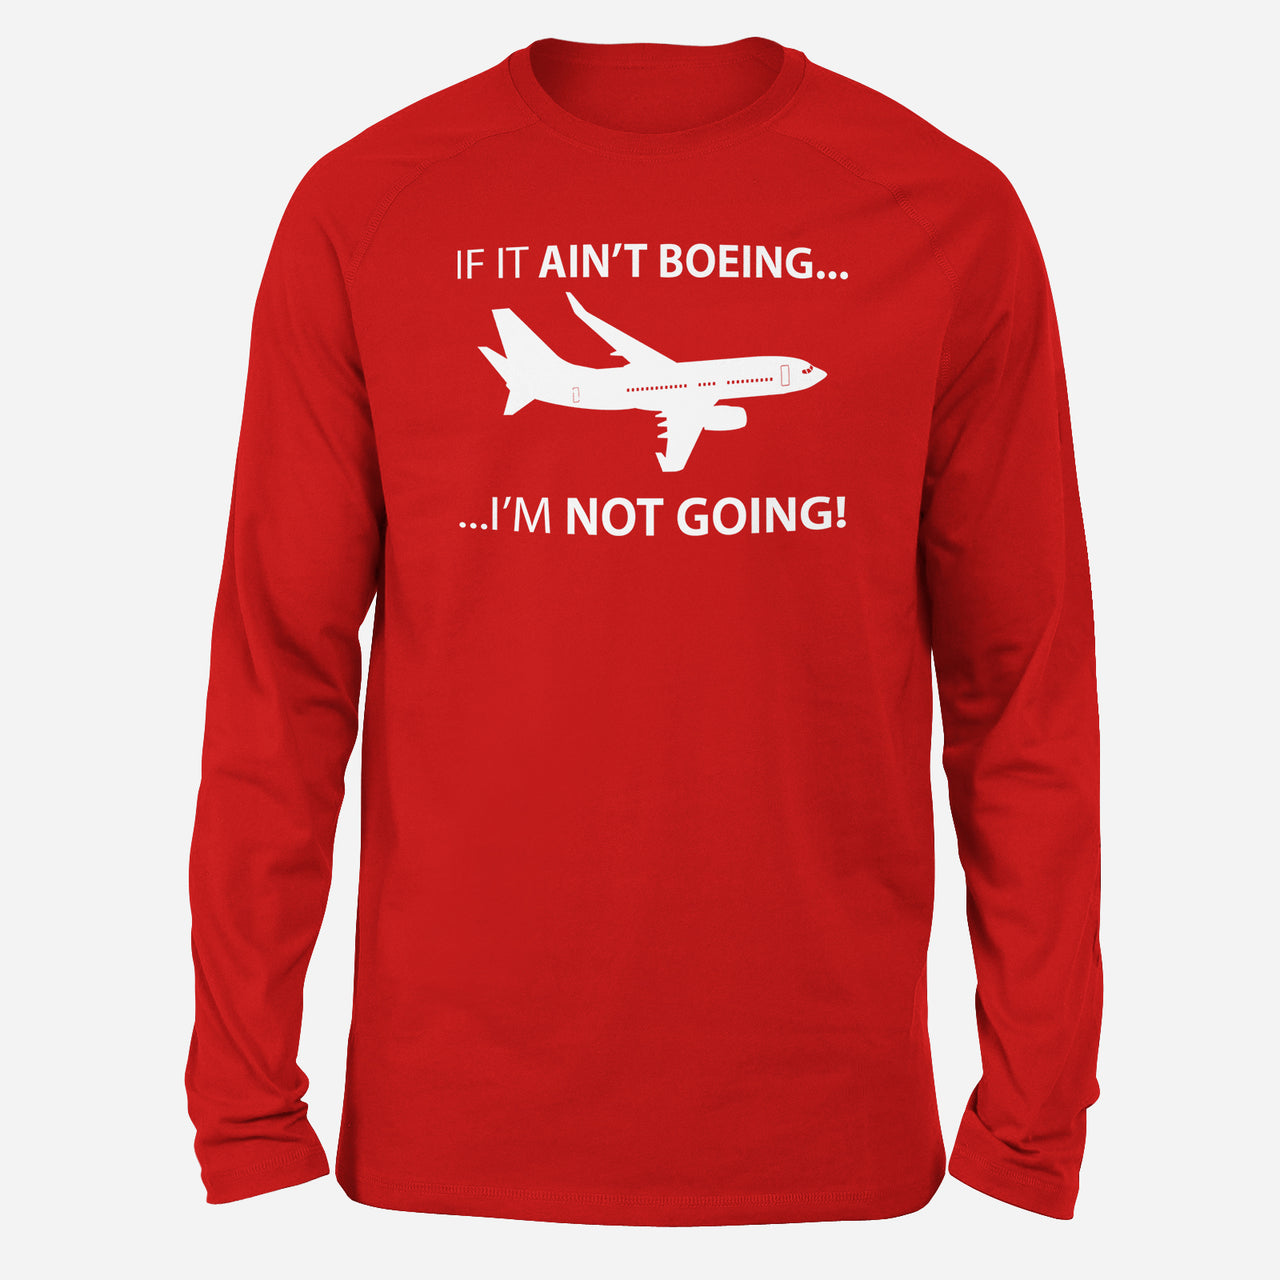 If It Ain't Boeing I'm Not Going! Designed Long-Sleeve T-Shirts